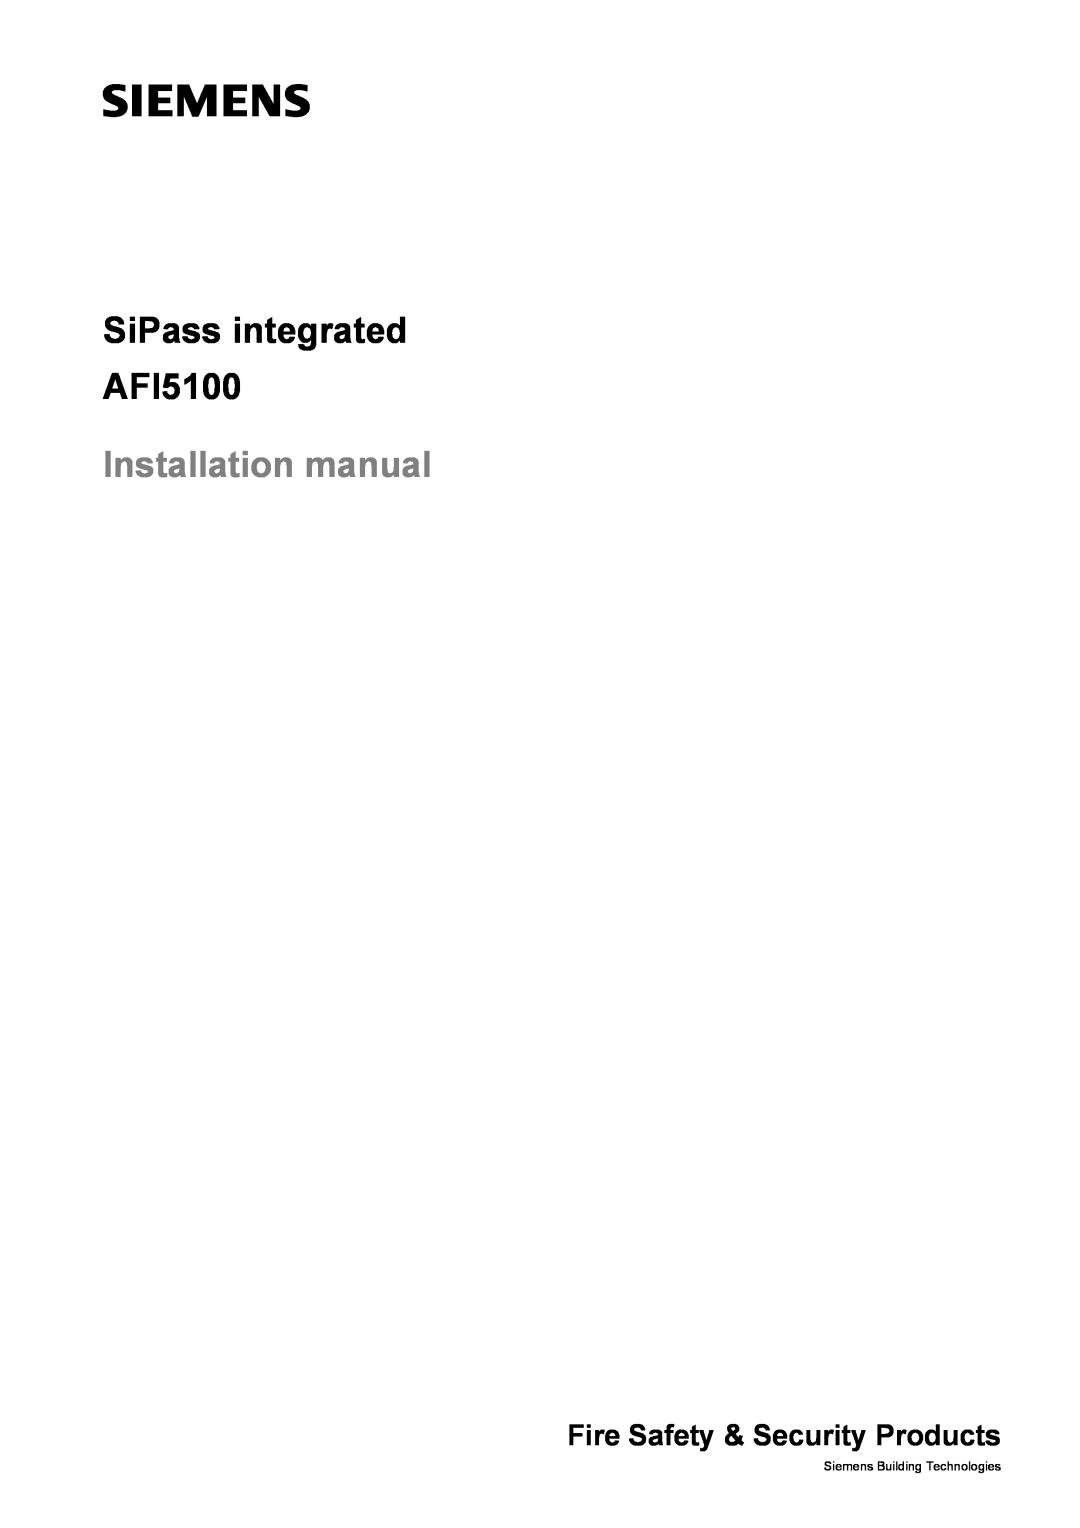 Siemens installation manual SiPass integrated AFI5100, Installation manual, Fire Safety & Security Products 